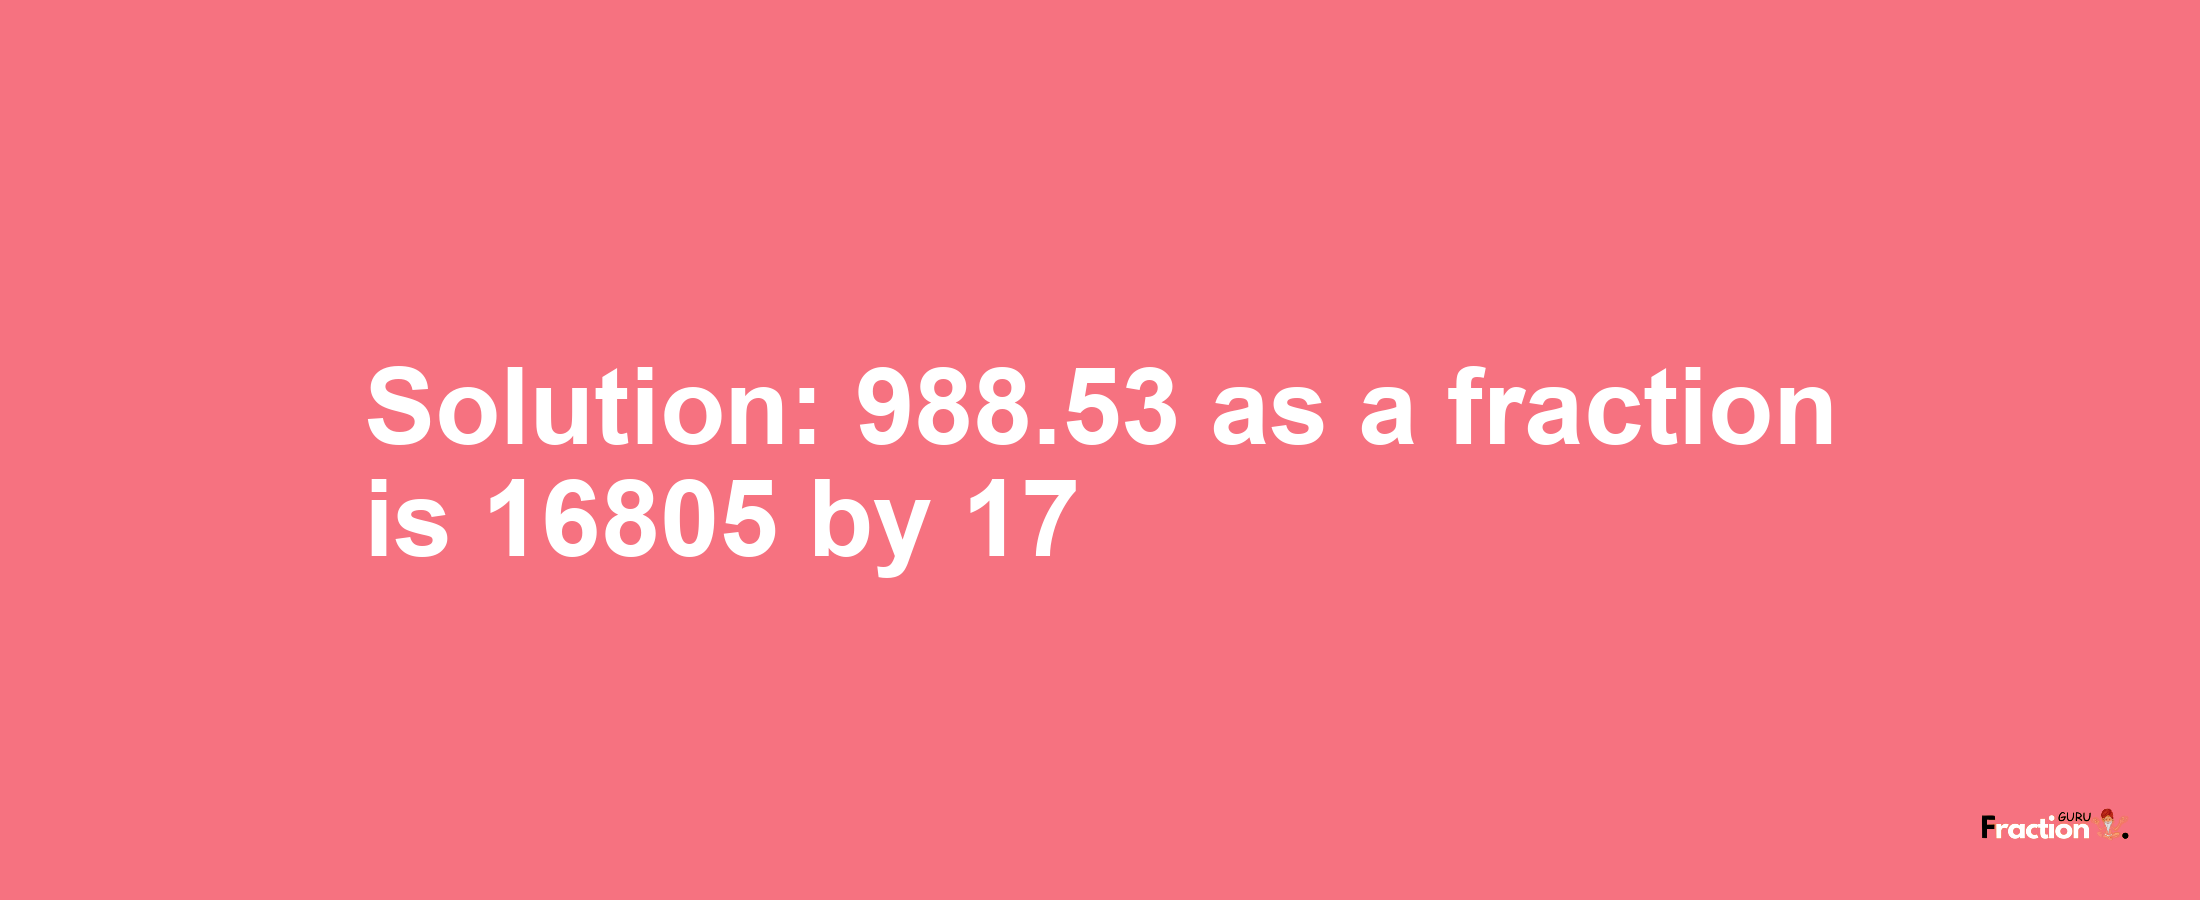 Solution:988.53 as a fraction is 16805/17